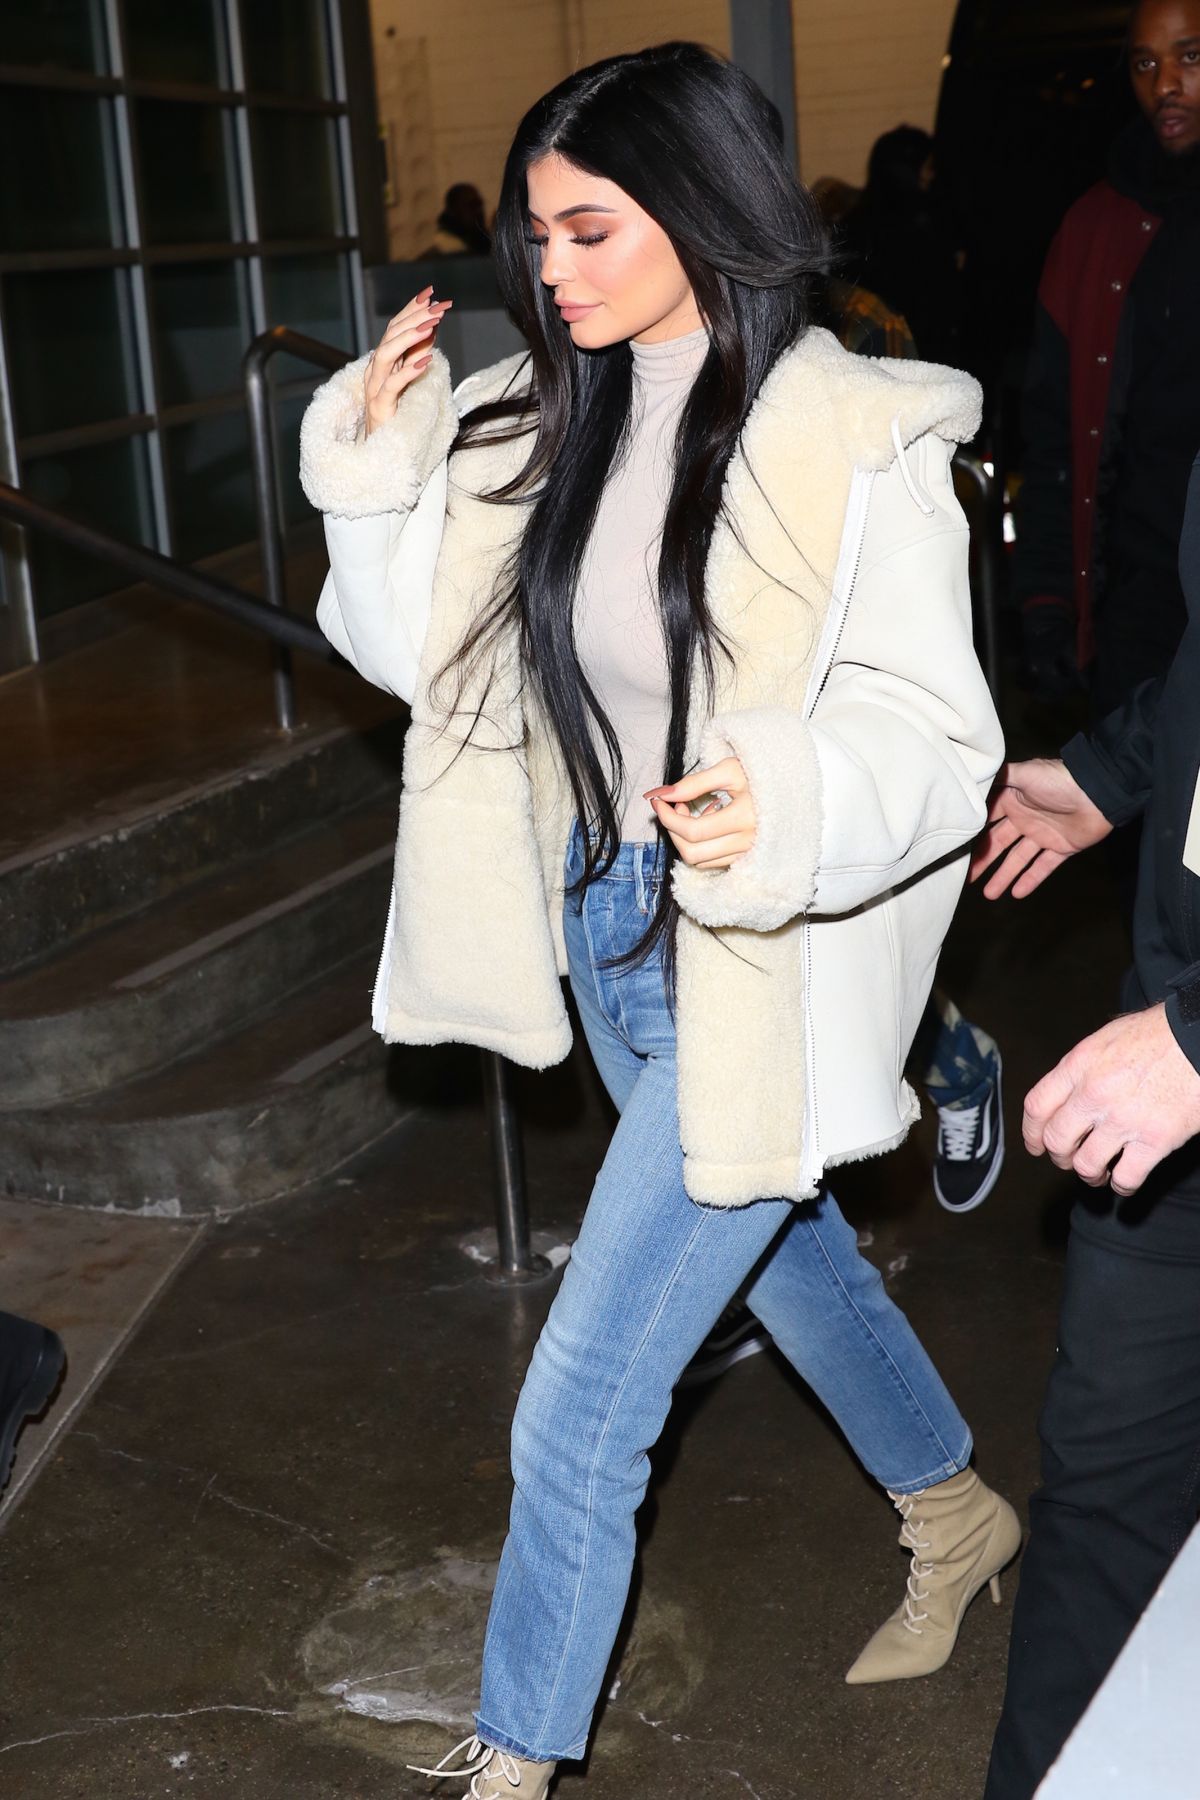 KYLIE JENNER Leaves Yeezy Fashion Show in New York 02/15/2017 – HawtCelebs